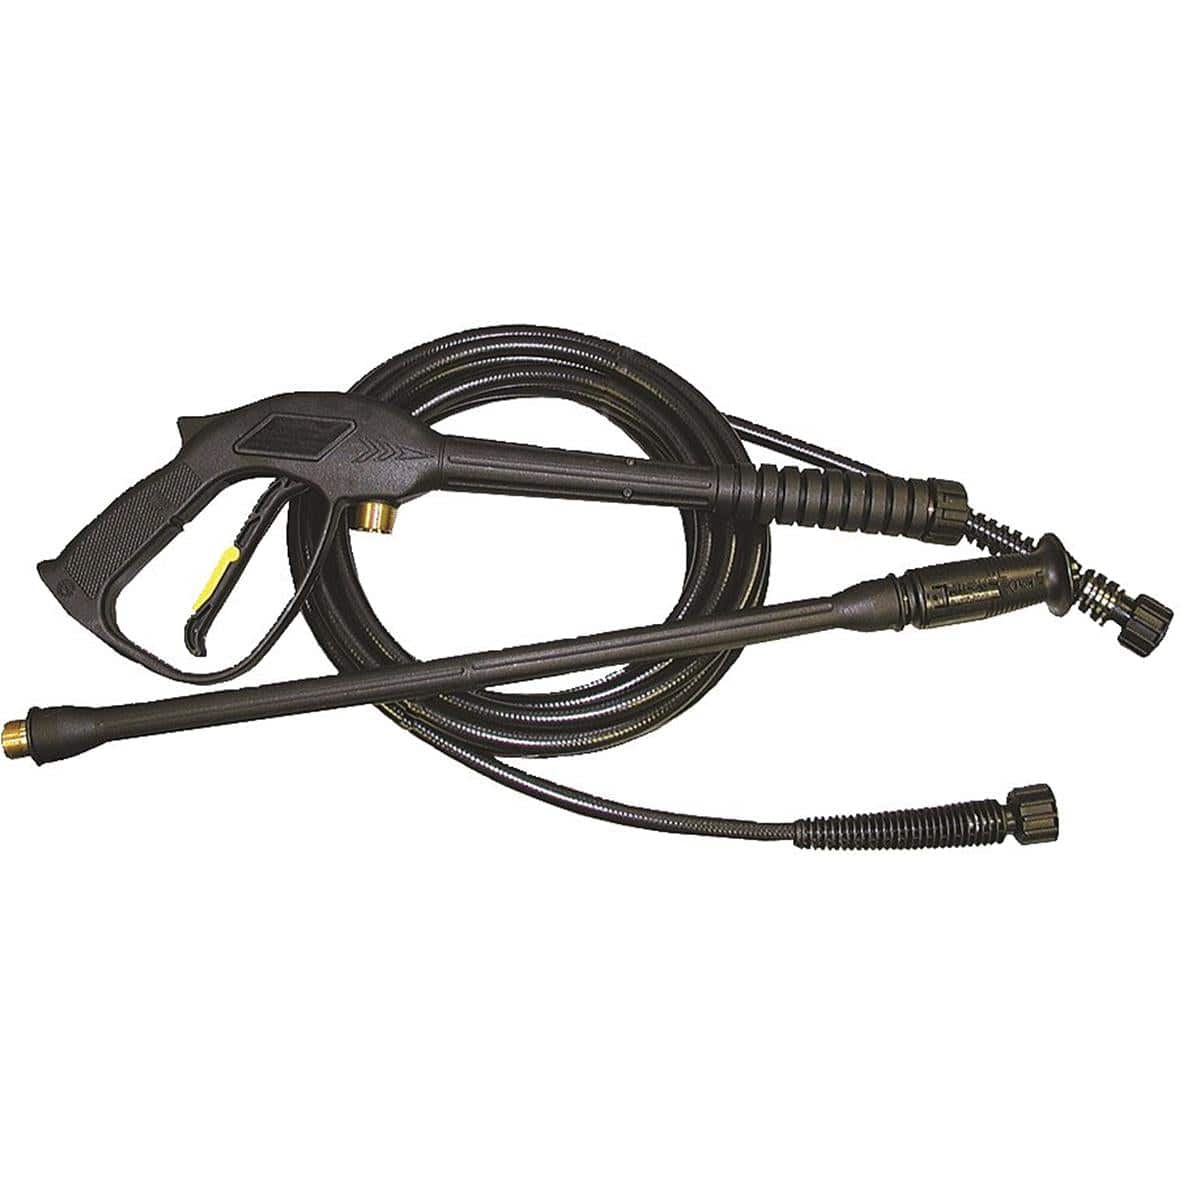 Pressure Washer Gun/Wand/Hose Kit - Economical by Gemplers